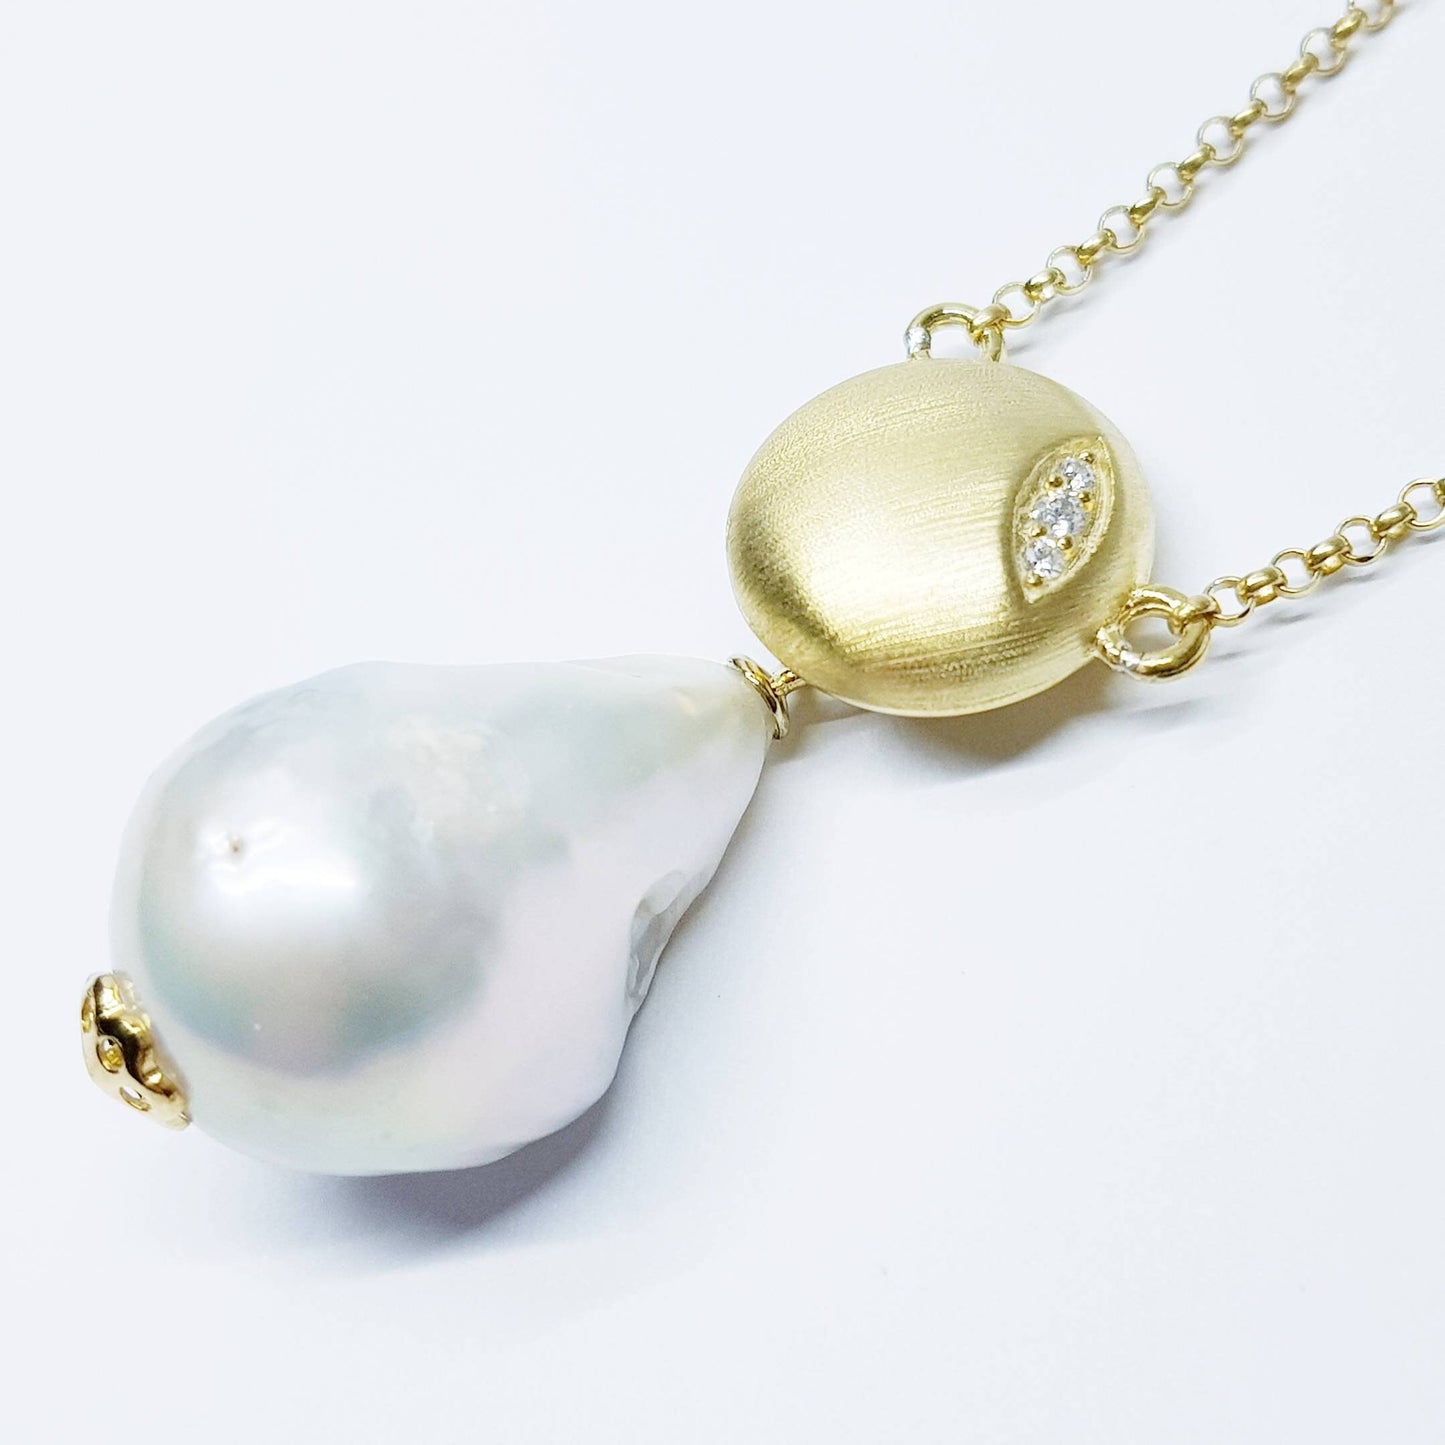 Unique necklace with large baroque pearl, large pearl pendant, unique jewelry